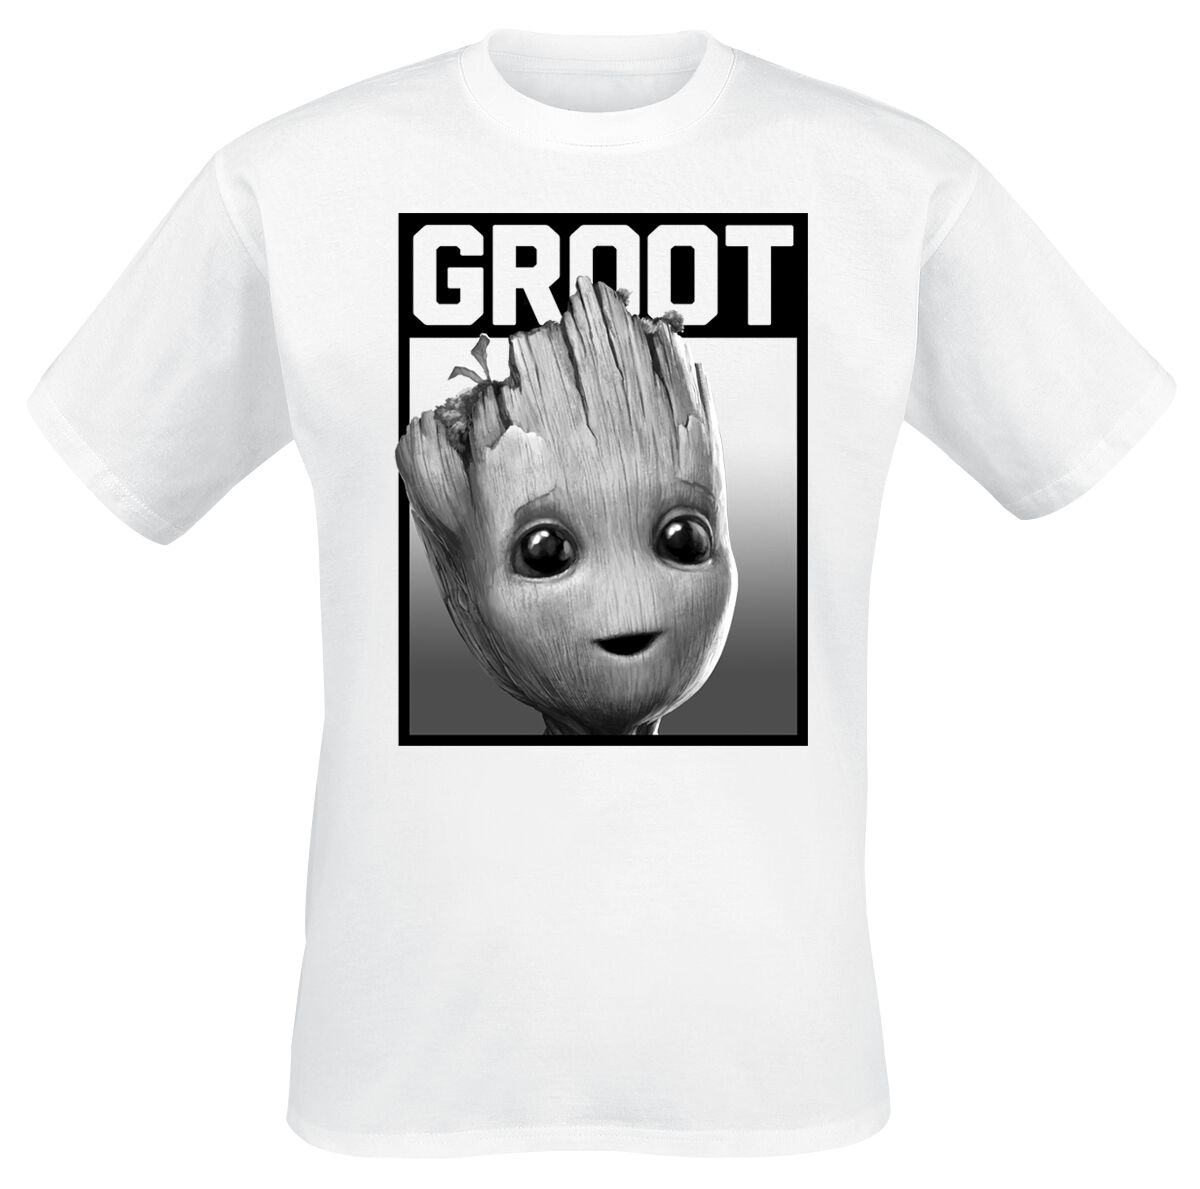 T-shirt | Of Groot - Galaxy Square EMP Guardians The |